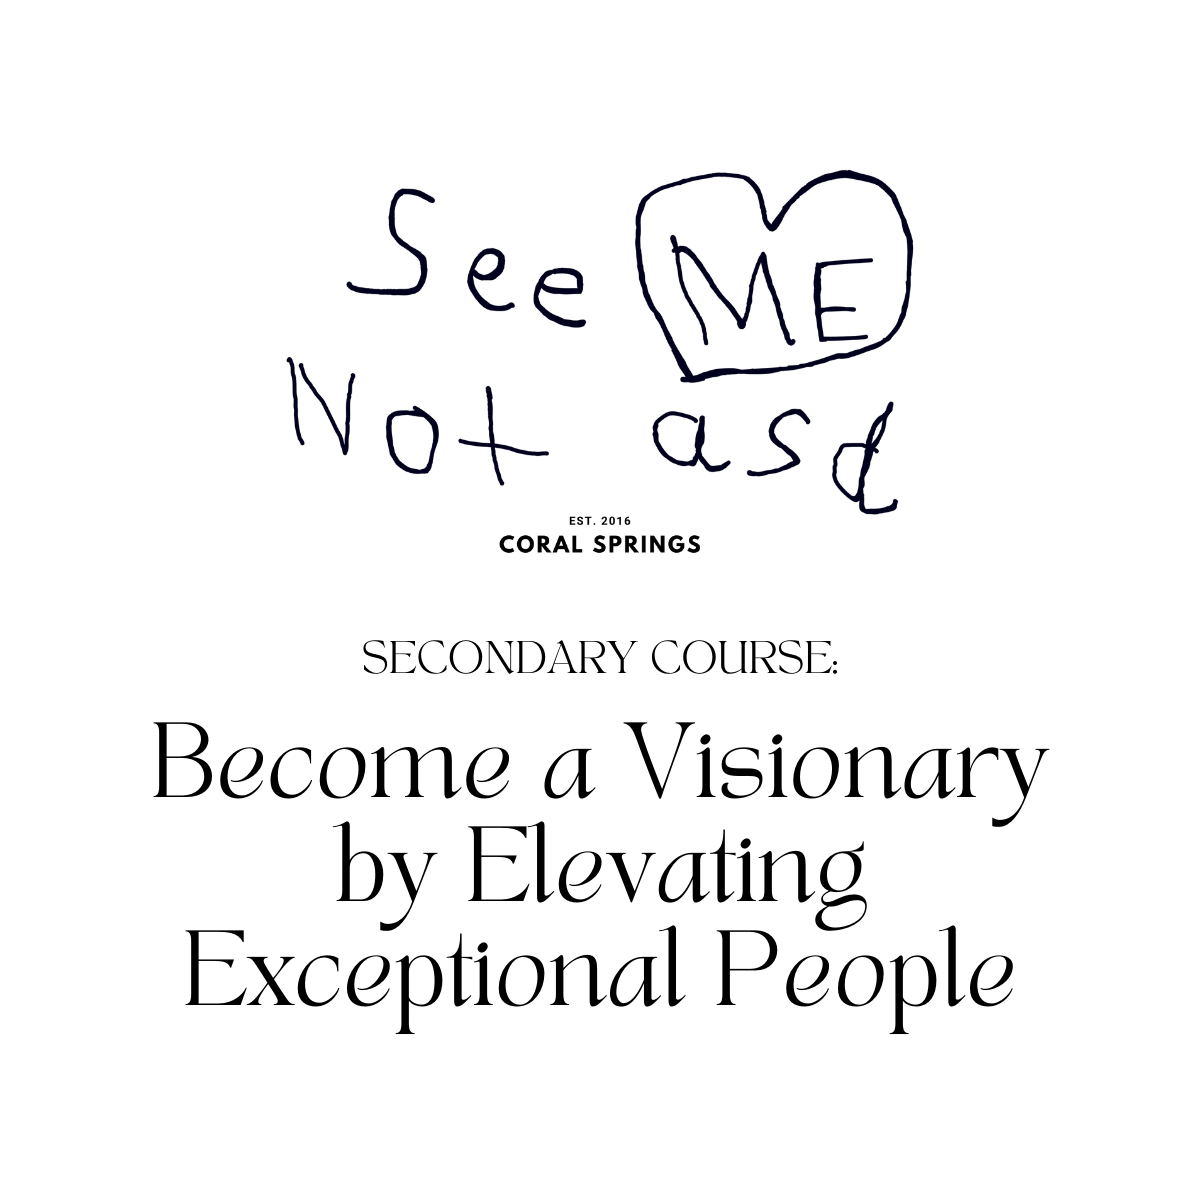 Secondary Course: Become a Visionary by Elevating Exceptional People